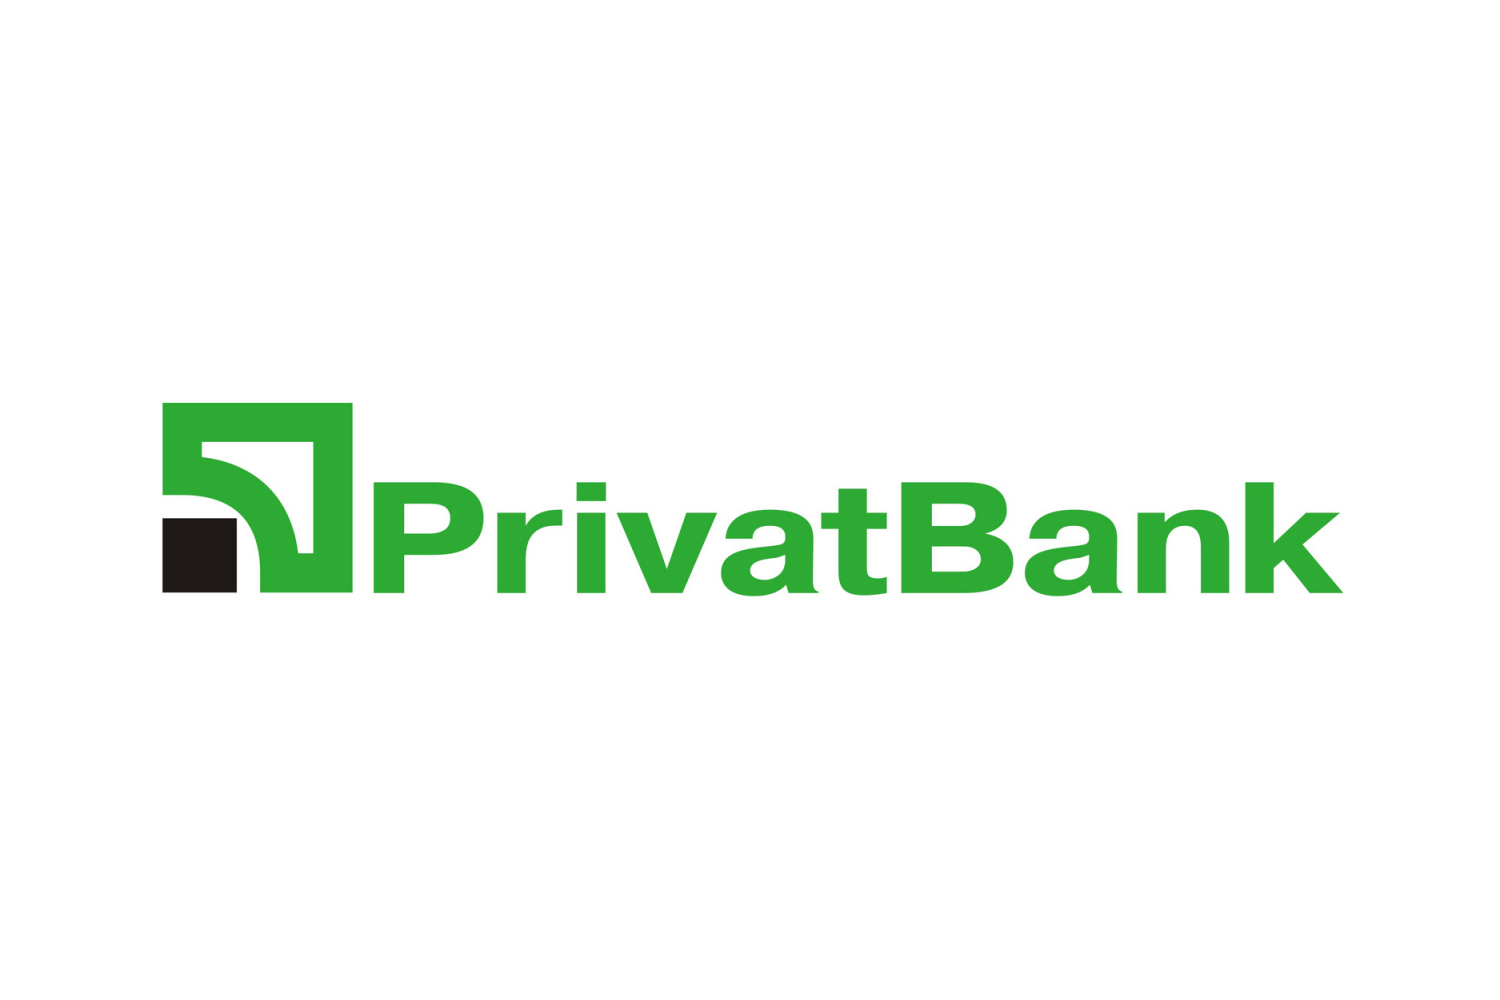 Scheduled works and services of PrivatBank will be unavailable